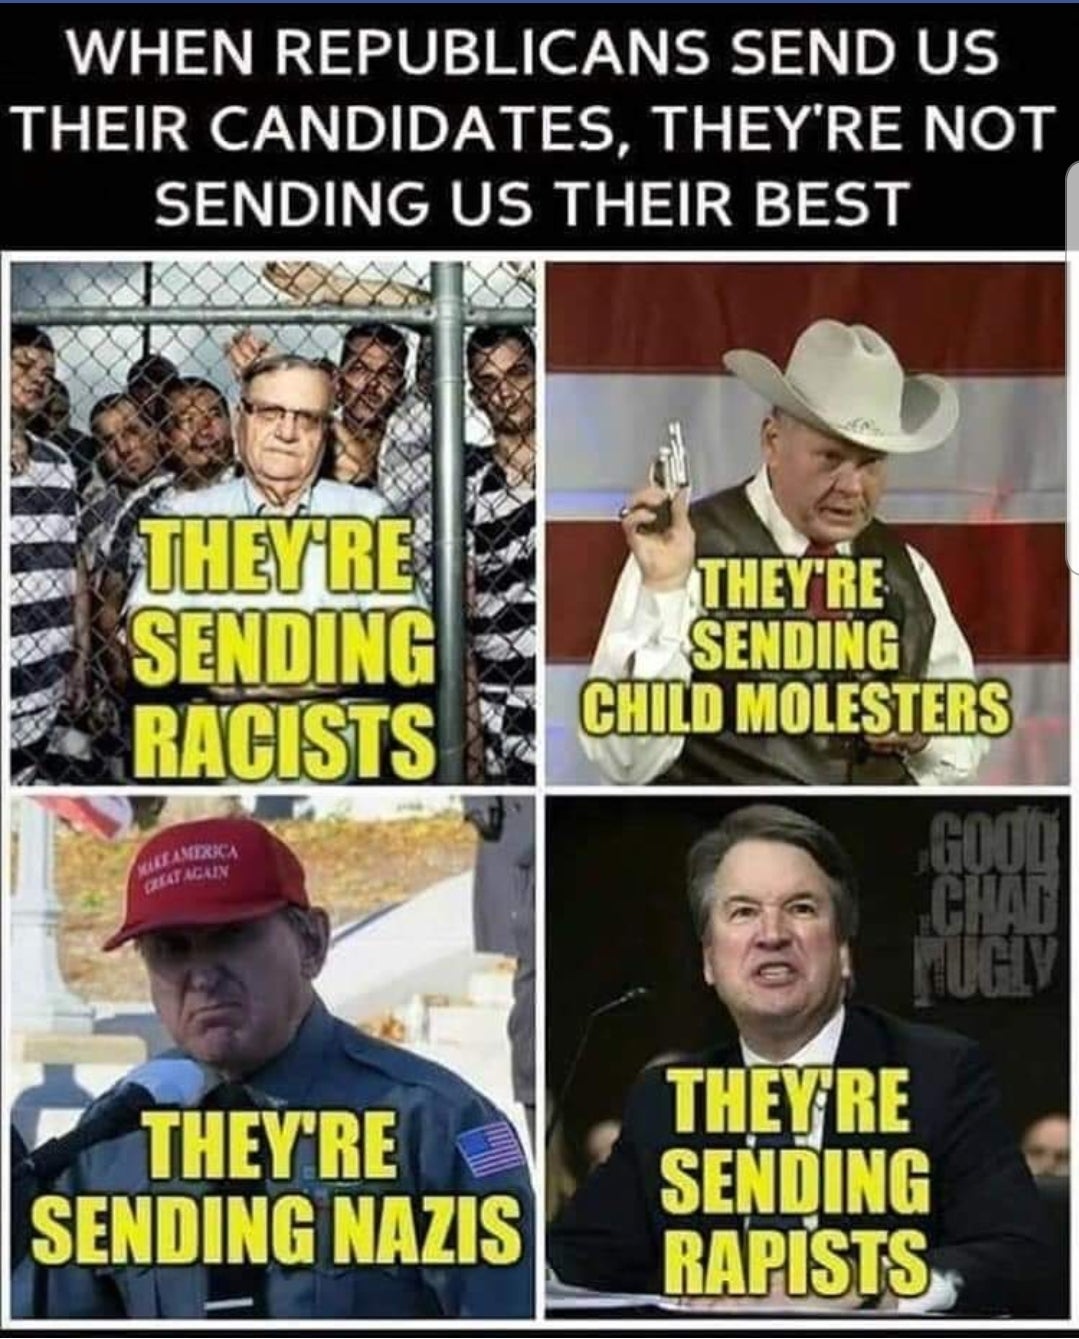 photo caption - When Republicans Send Us Their Candidates, They'Re Not Sending Us Their Best They Re Sending Racists They'Re Sending Child Molesters Meanirica Get Again They'Re Sending Nazis They Re Sending Rapists